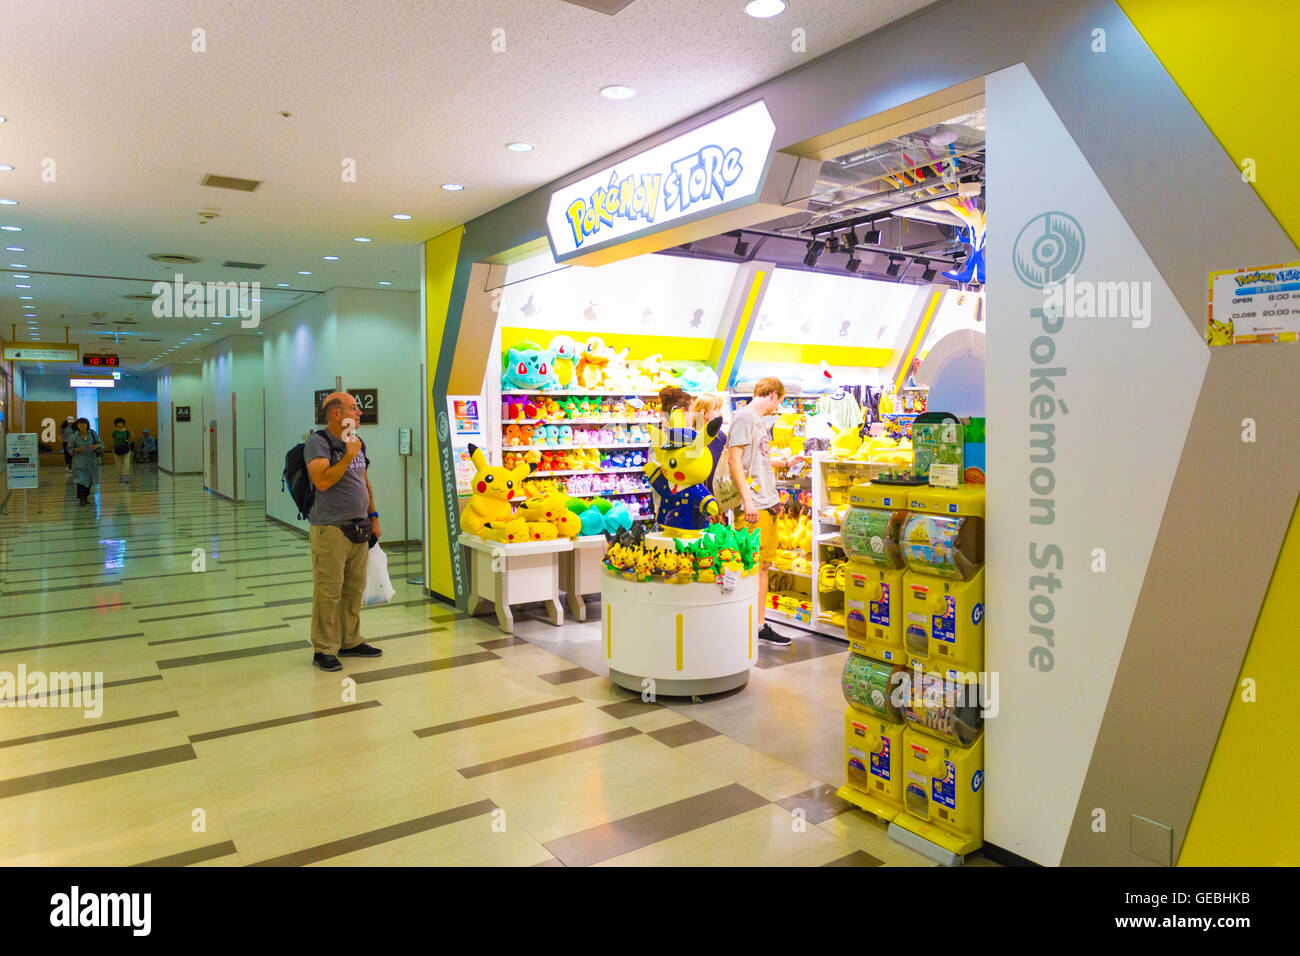 Caucasian Tourists Shopping At Pokemon Store At Beginning Of Expolosive Popularity As A Result Of The Pokemon Go Game At A Shop Stock Photo Alamy